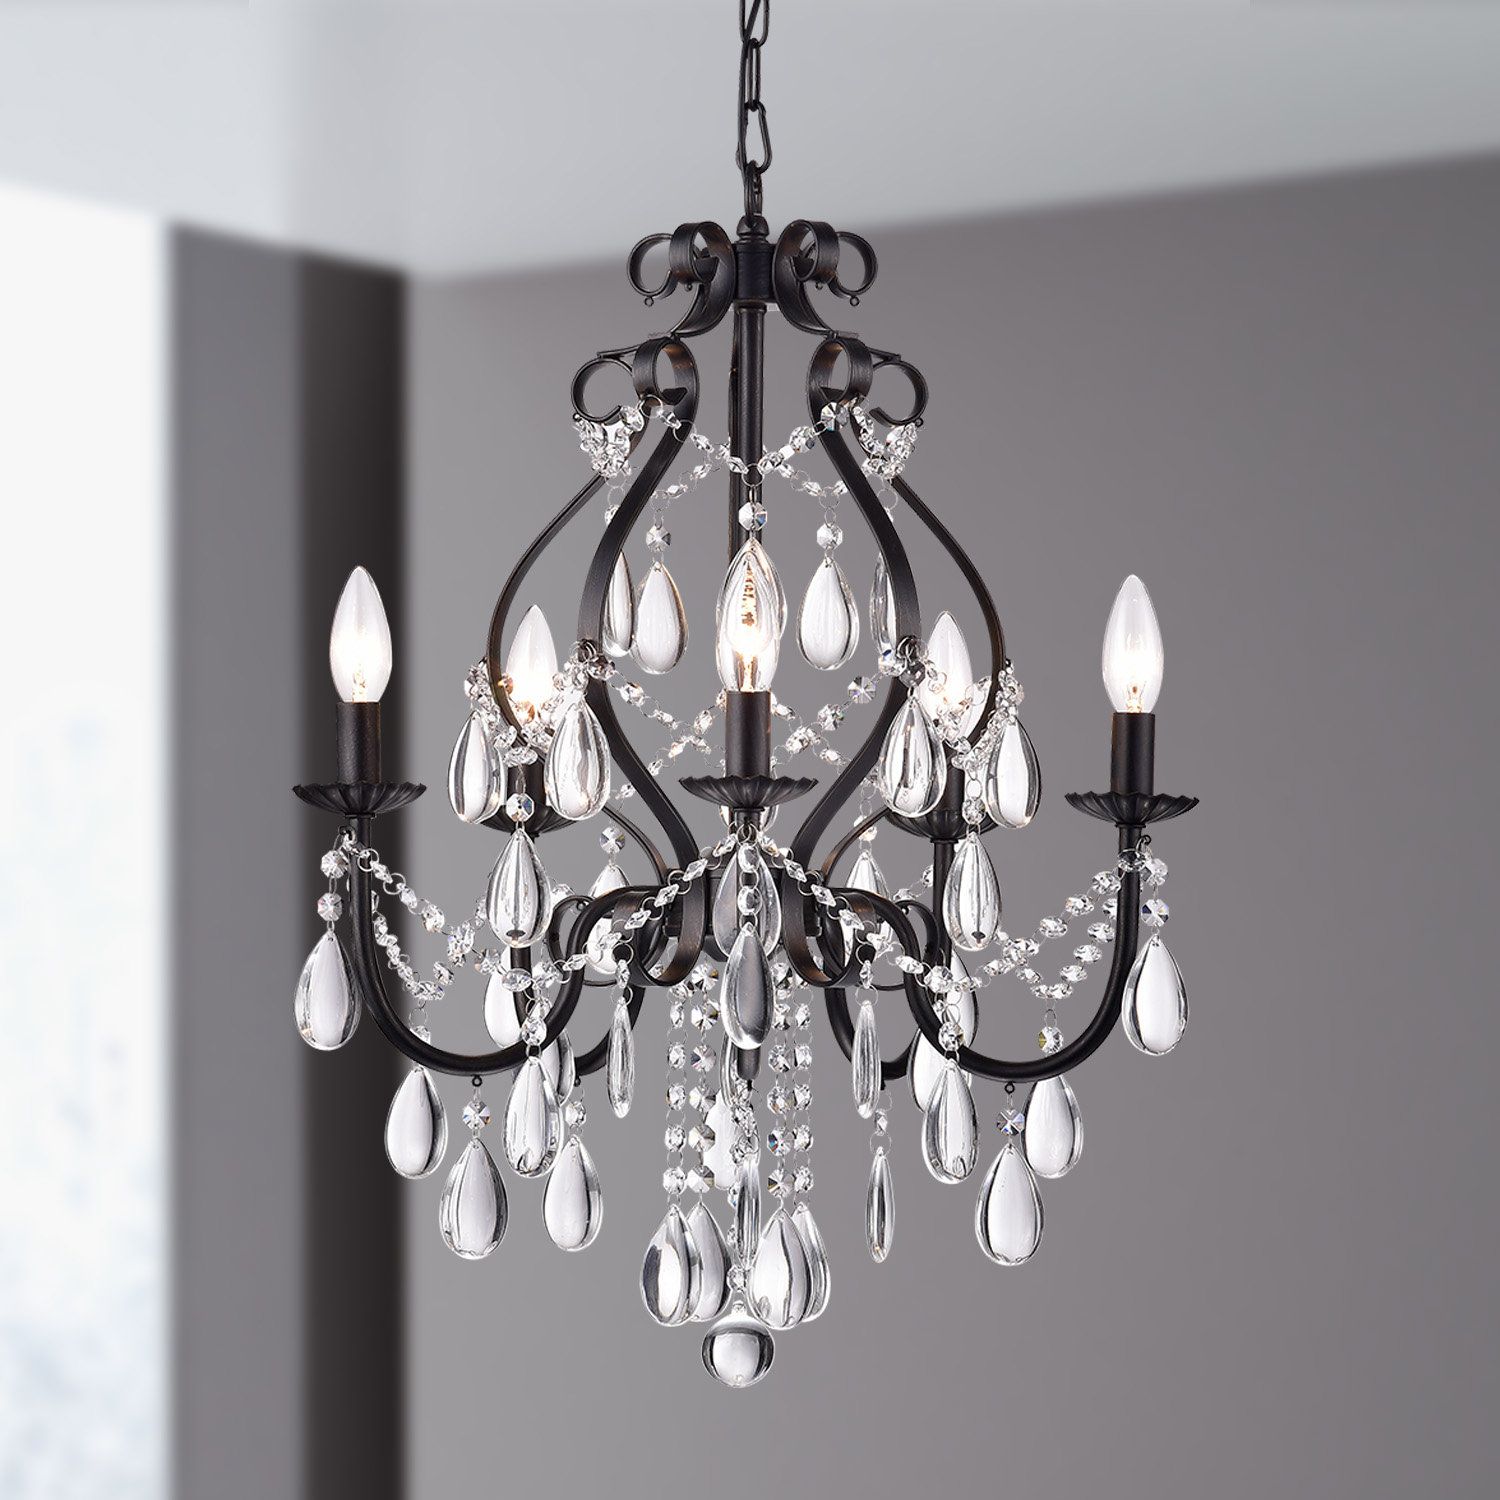 Axl 5 Light Candle Style Chandelier For Blanchette 5 Light Candle Style Chandeliers (View 8 of 30)